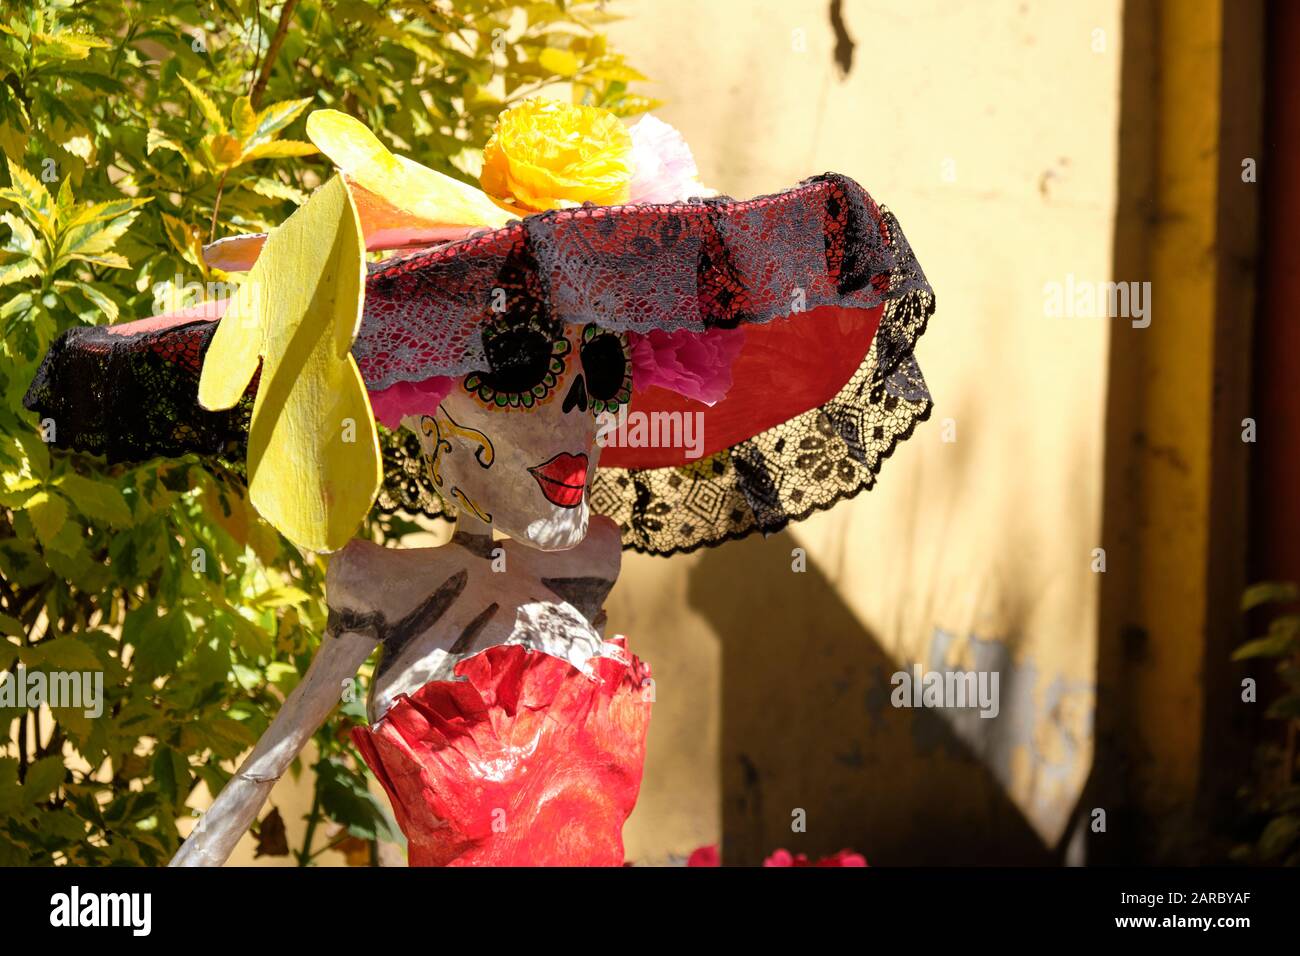 S traditional La Catrina mannequin with a large red hat, in a sunny courtyard Stock Photo